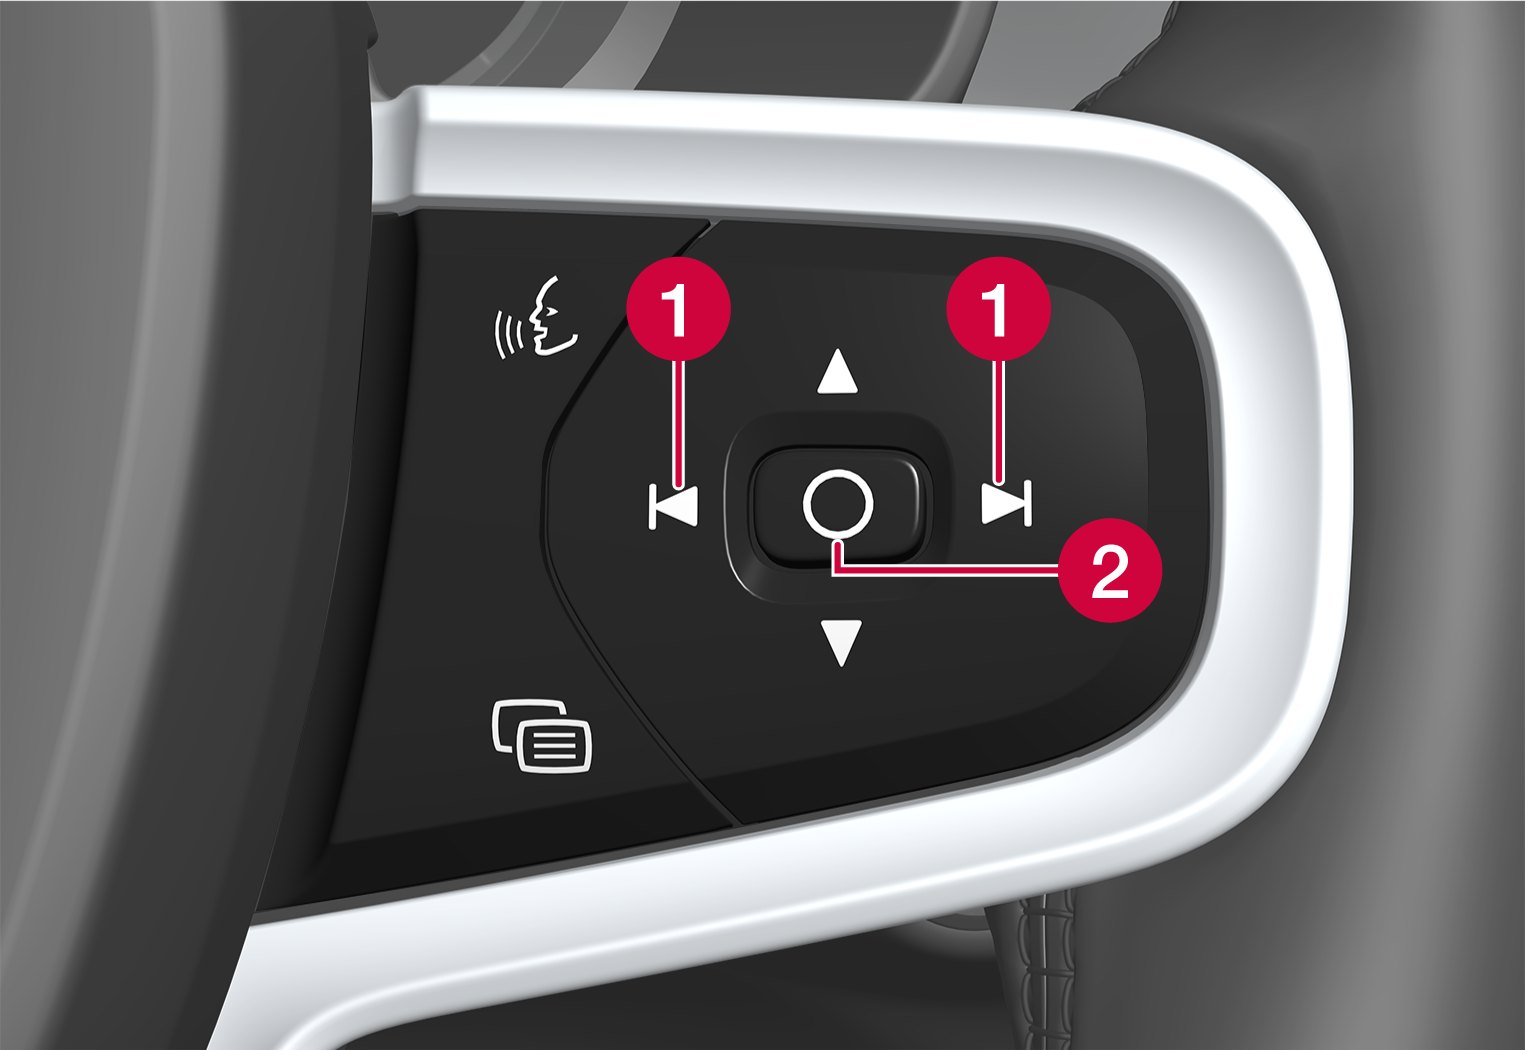 P5P6-2037-iCup-Message in driver display and steering wheel buttons